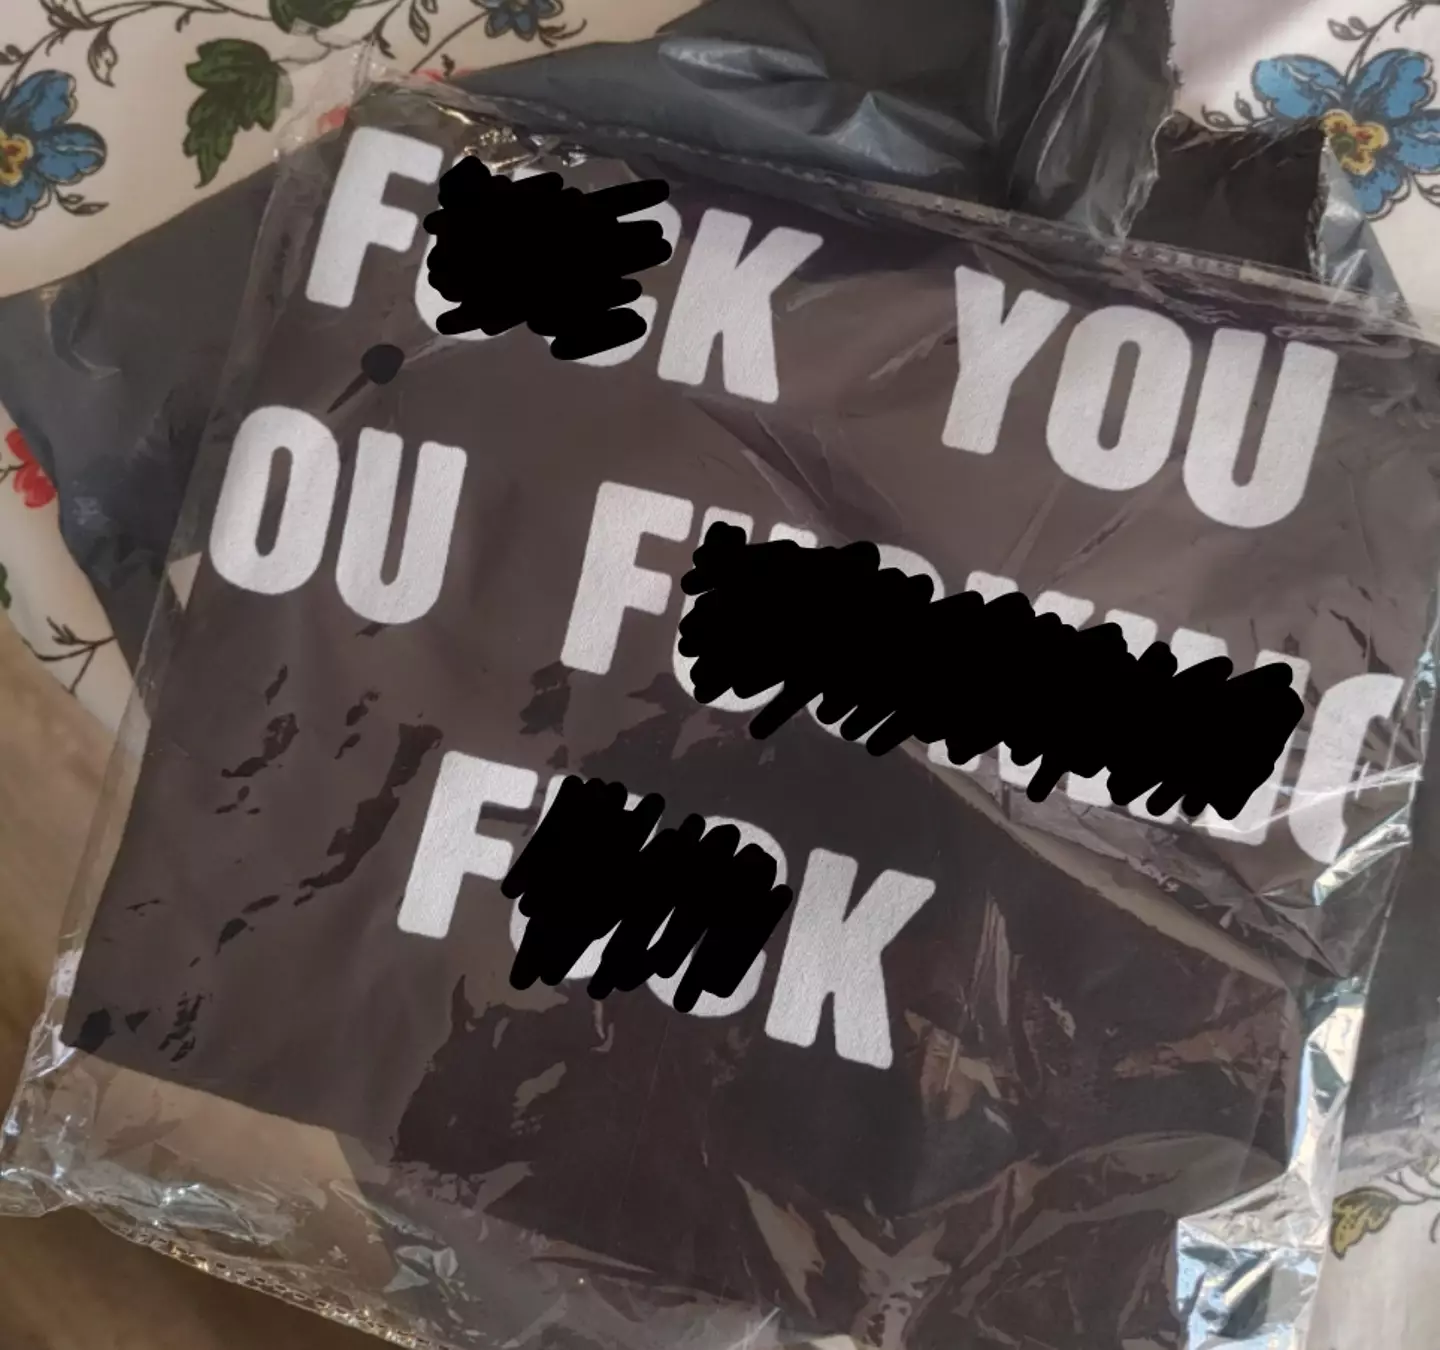 The customer was shocked by the T-shirt she received.